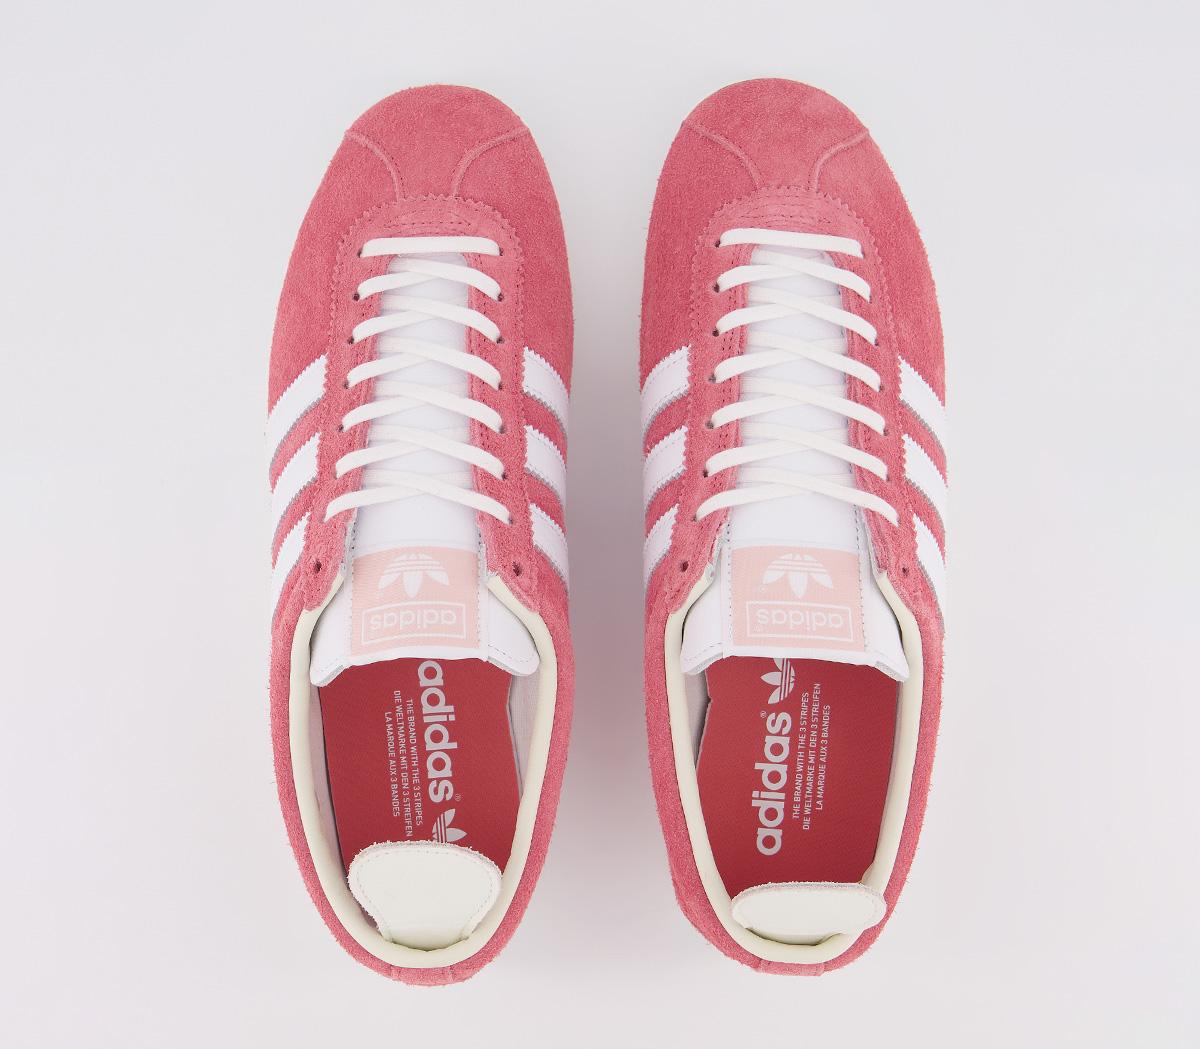 adidas Gazelle Vintage Trainers Real Pink White White - His trainers